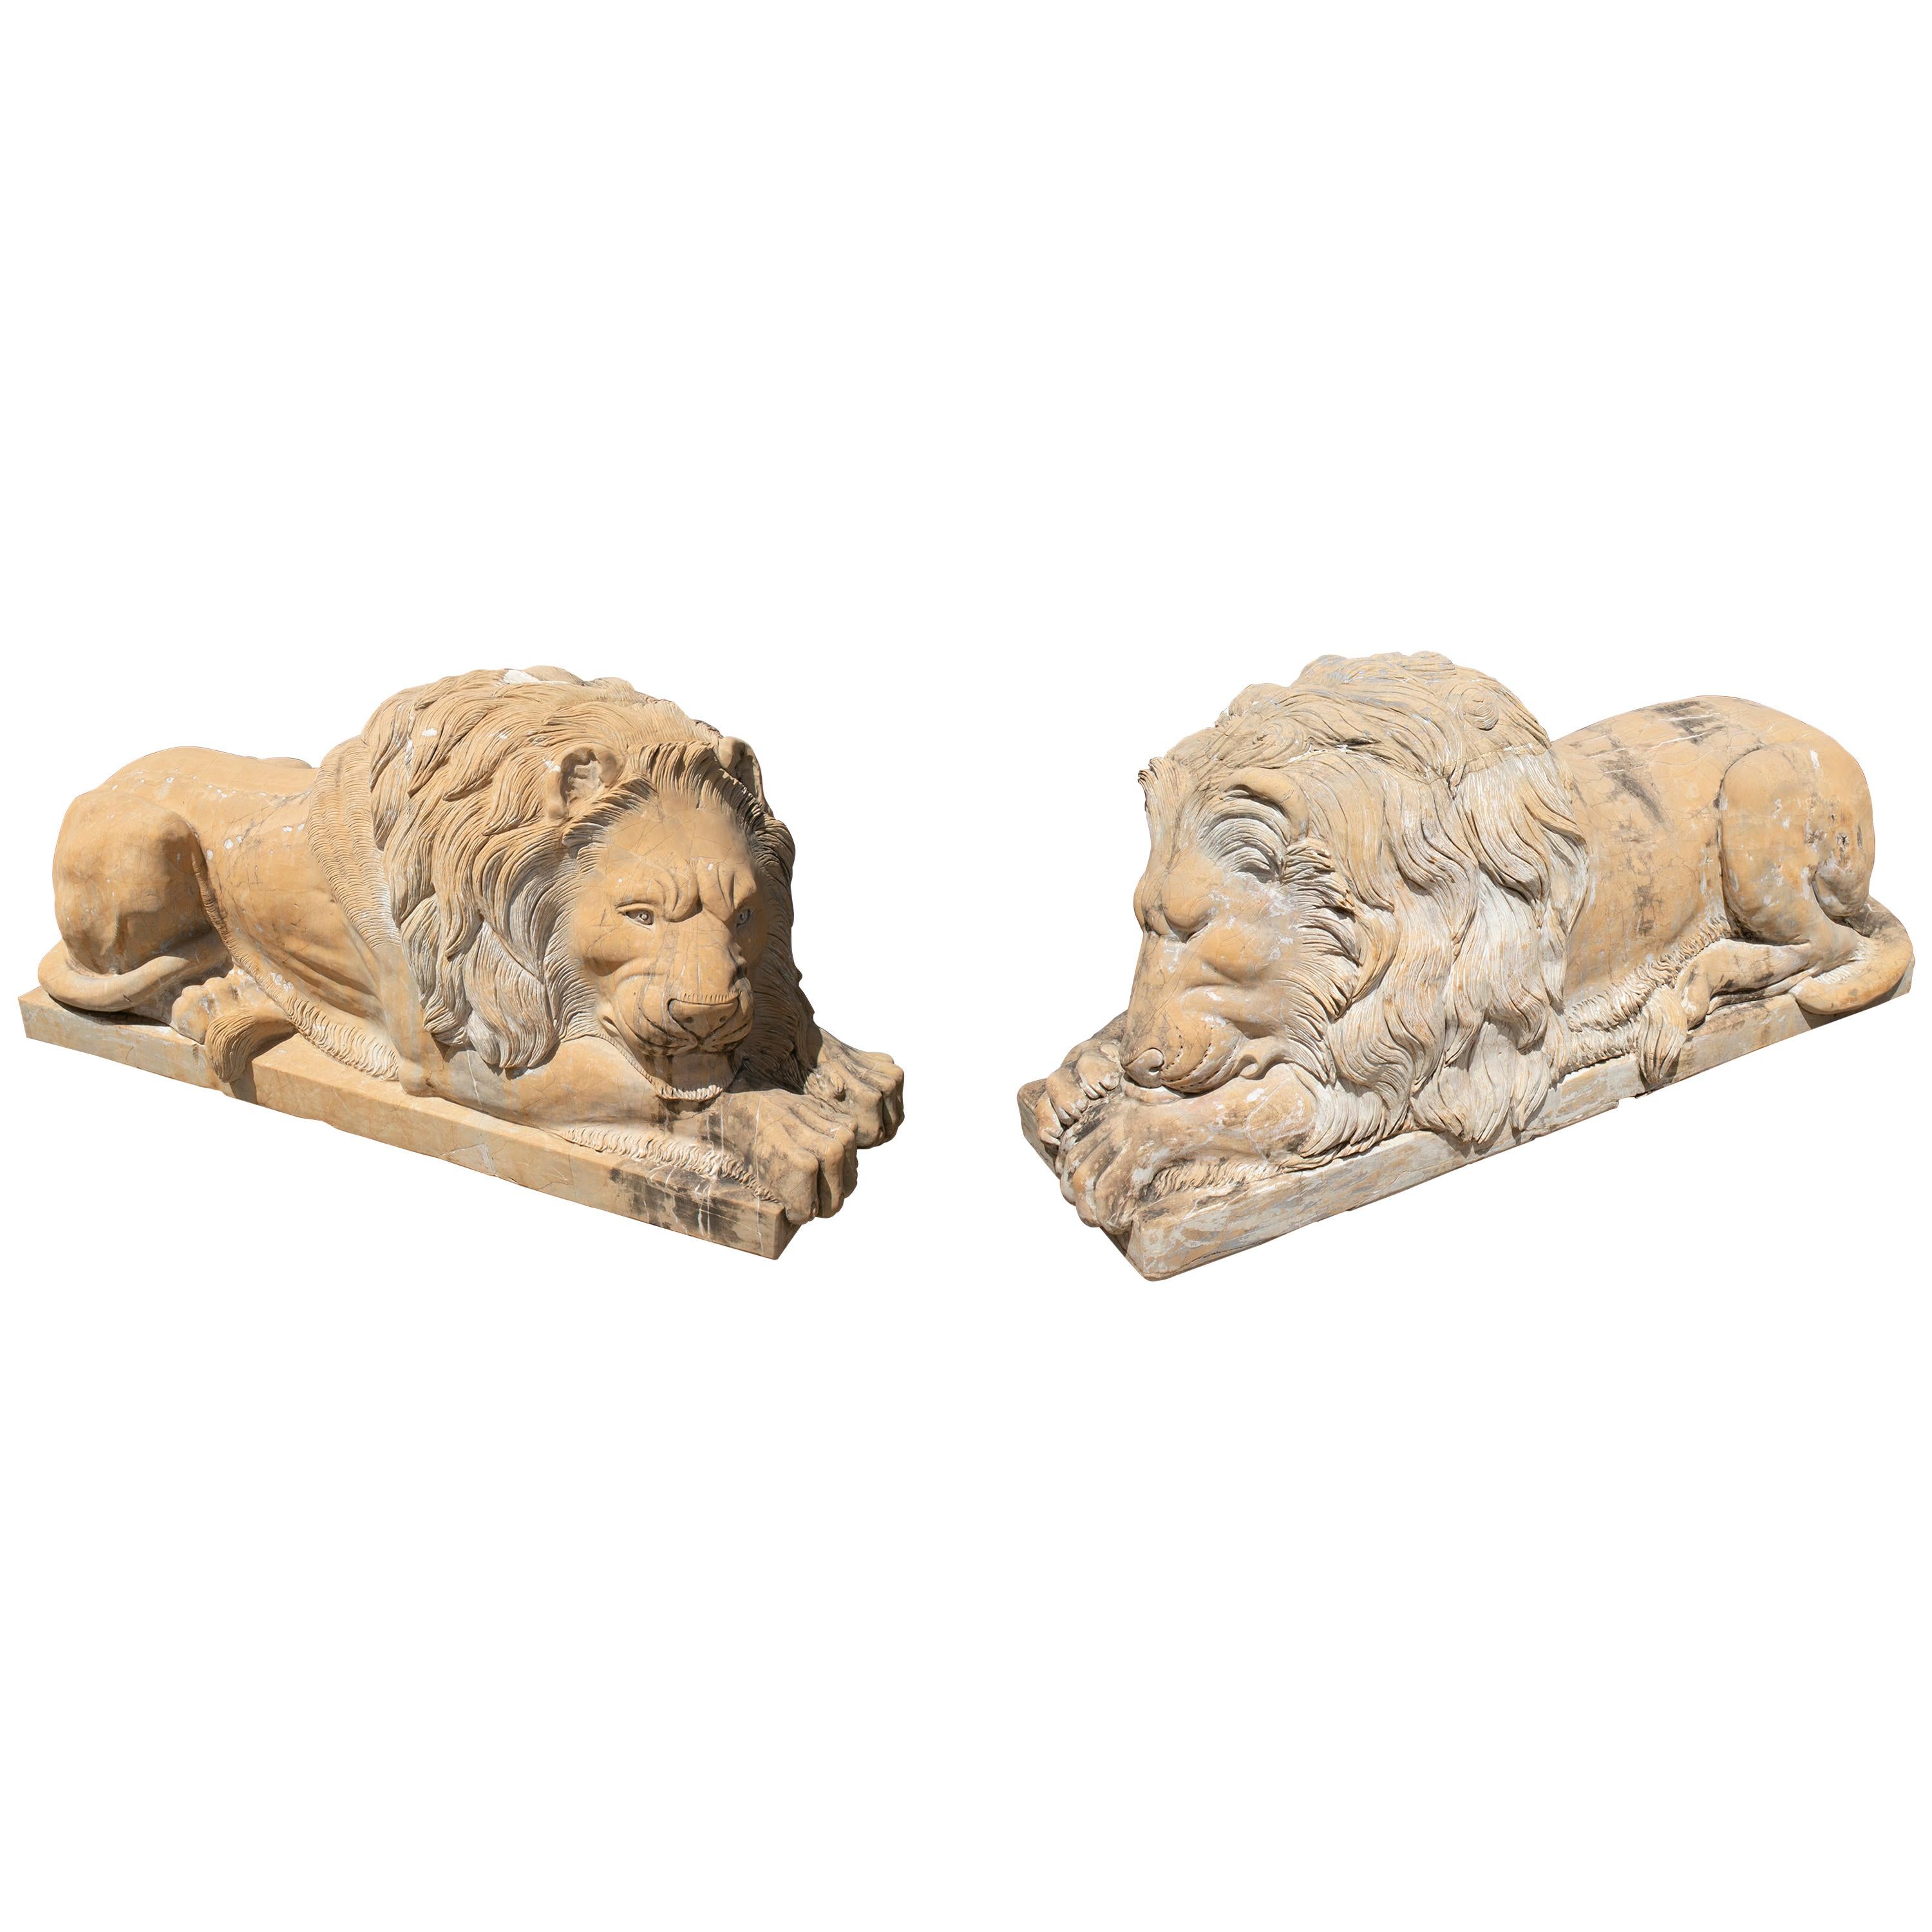 Pair of Hand Carved Giallo Cream Marble Lying Lions